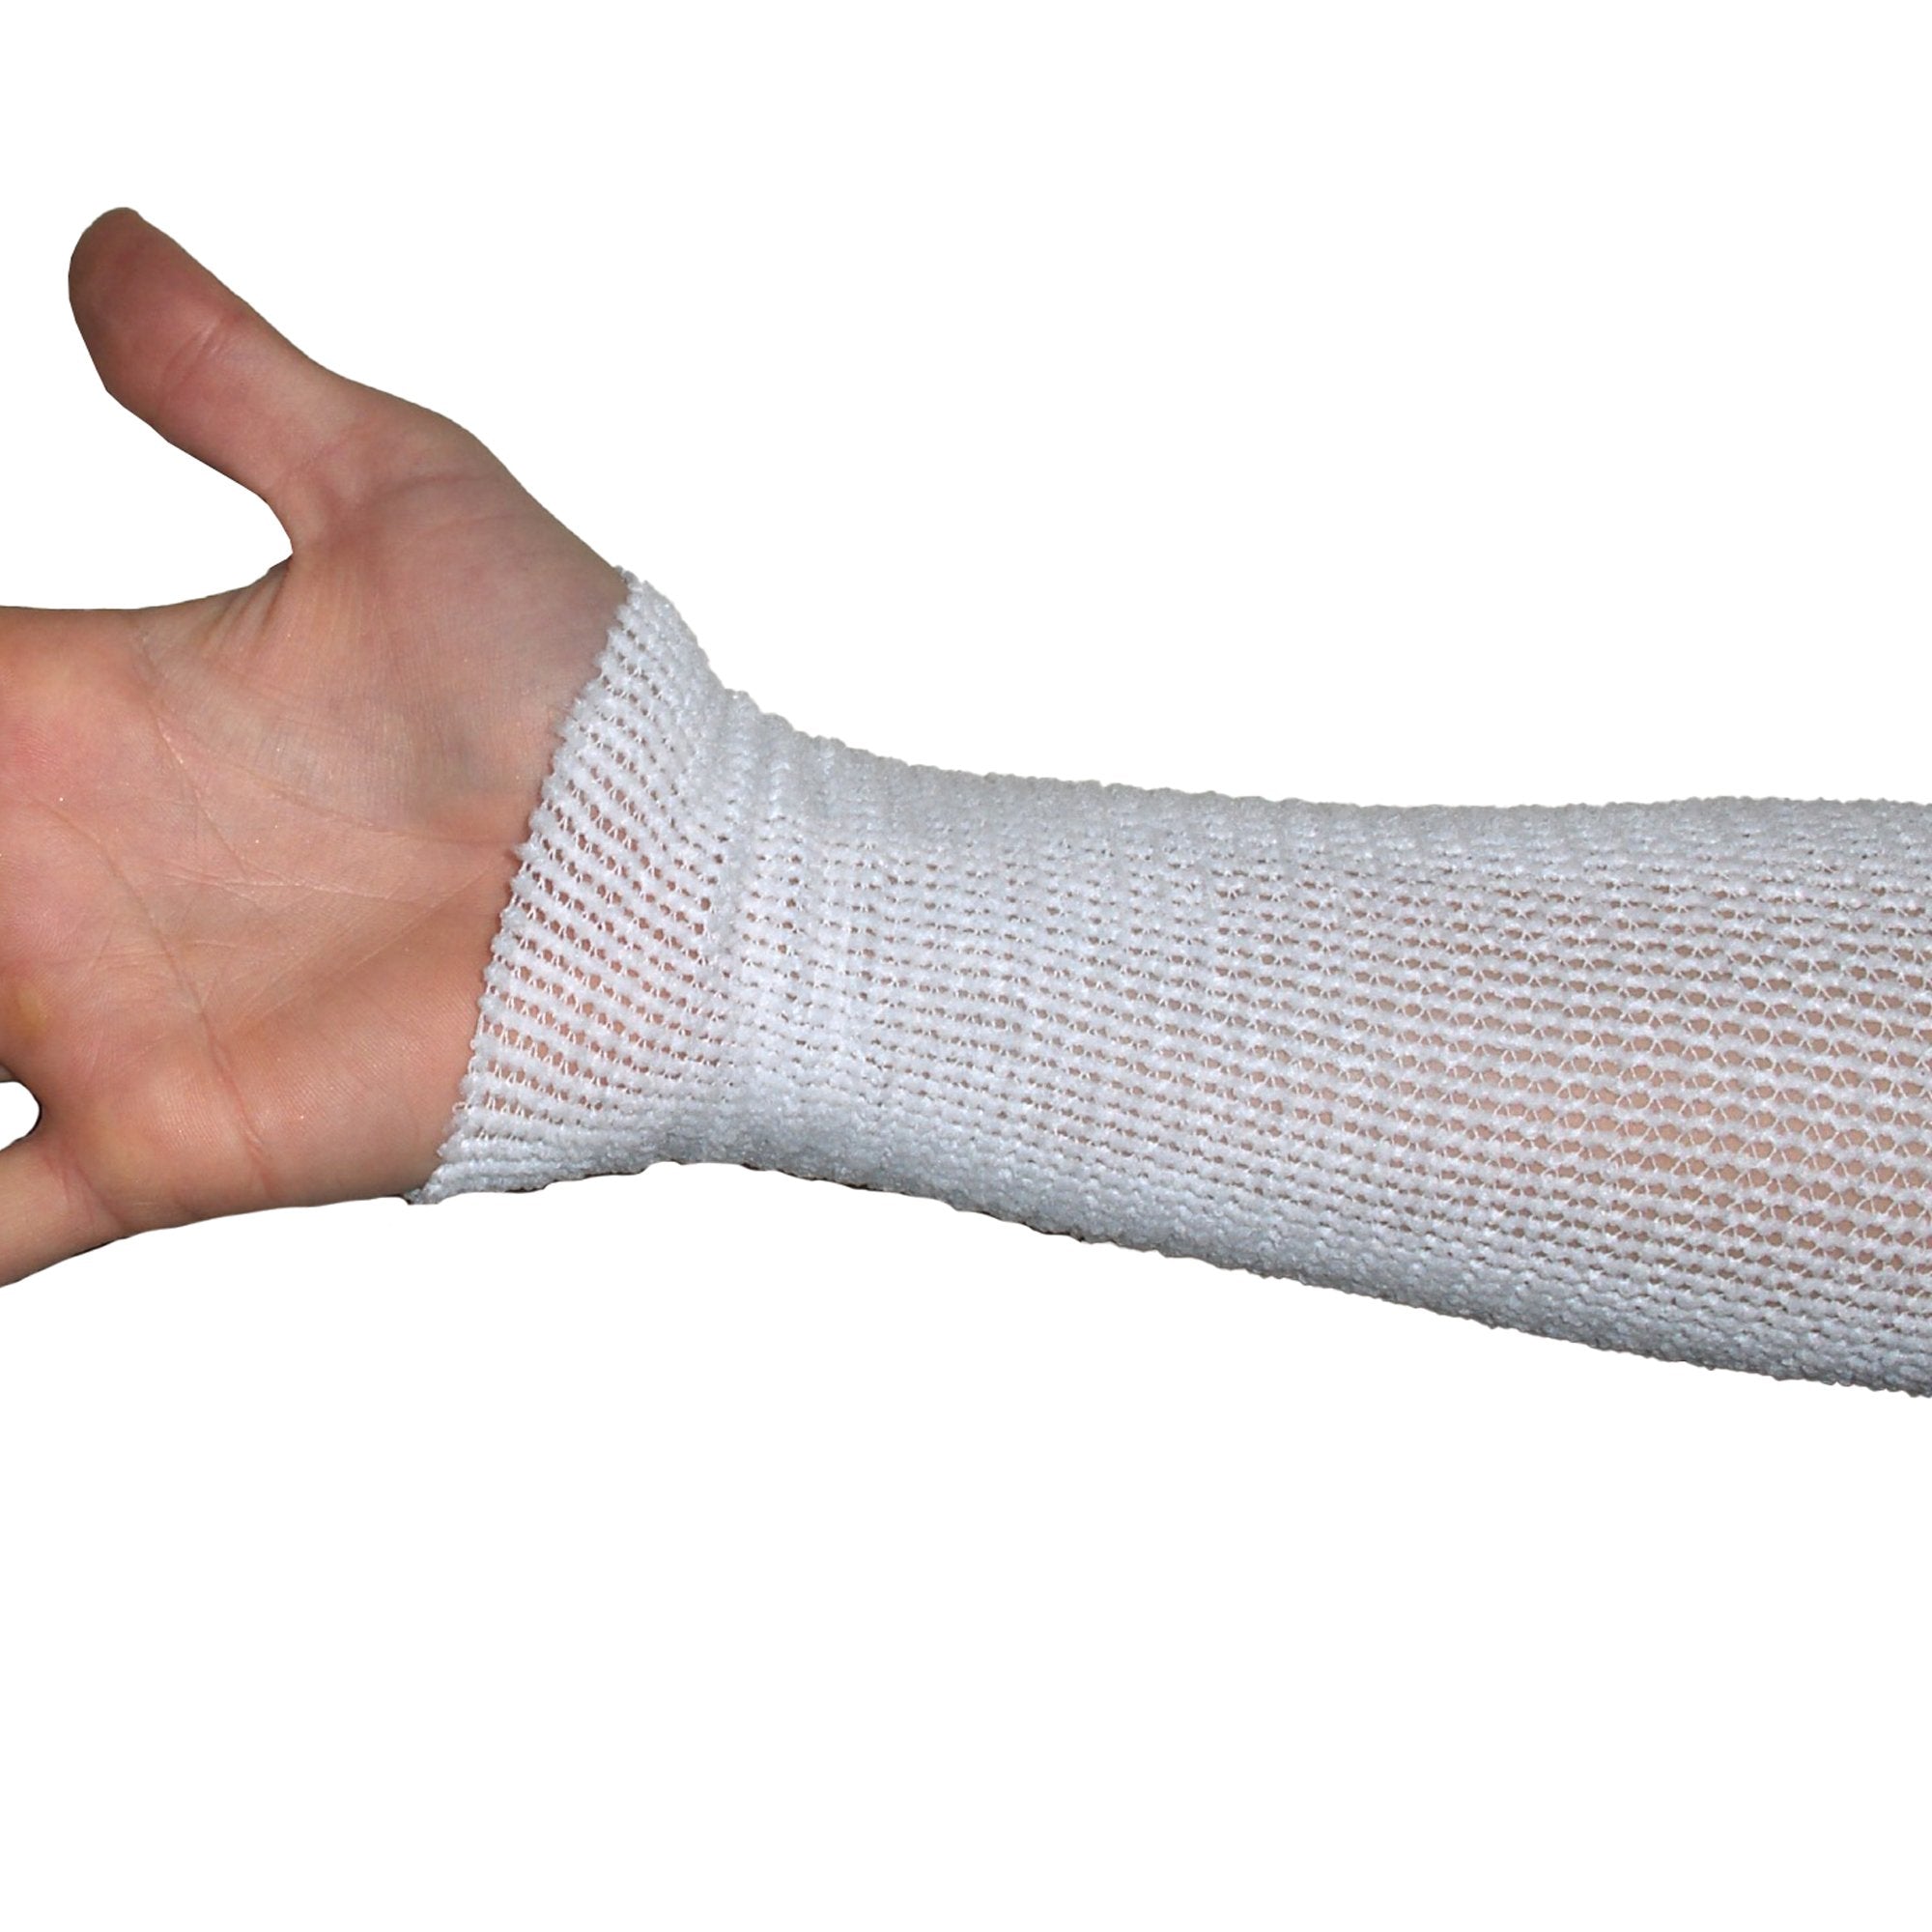 Compression Stockinette EdemaWear Medium White Wrist to Shoulder / Foot to Groin